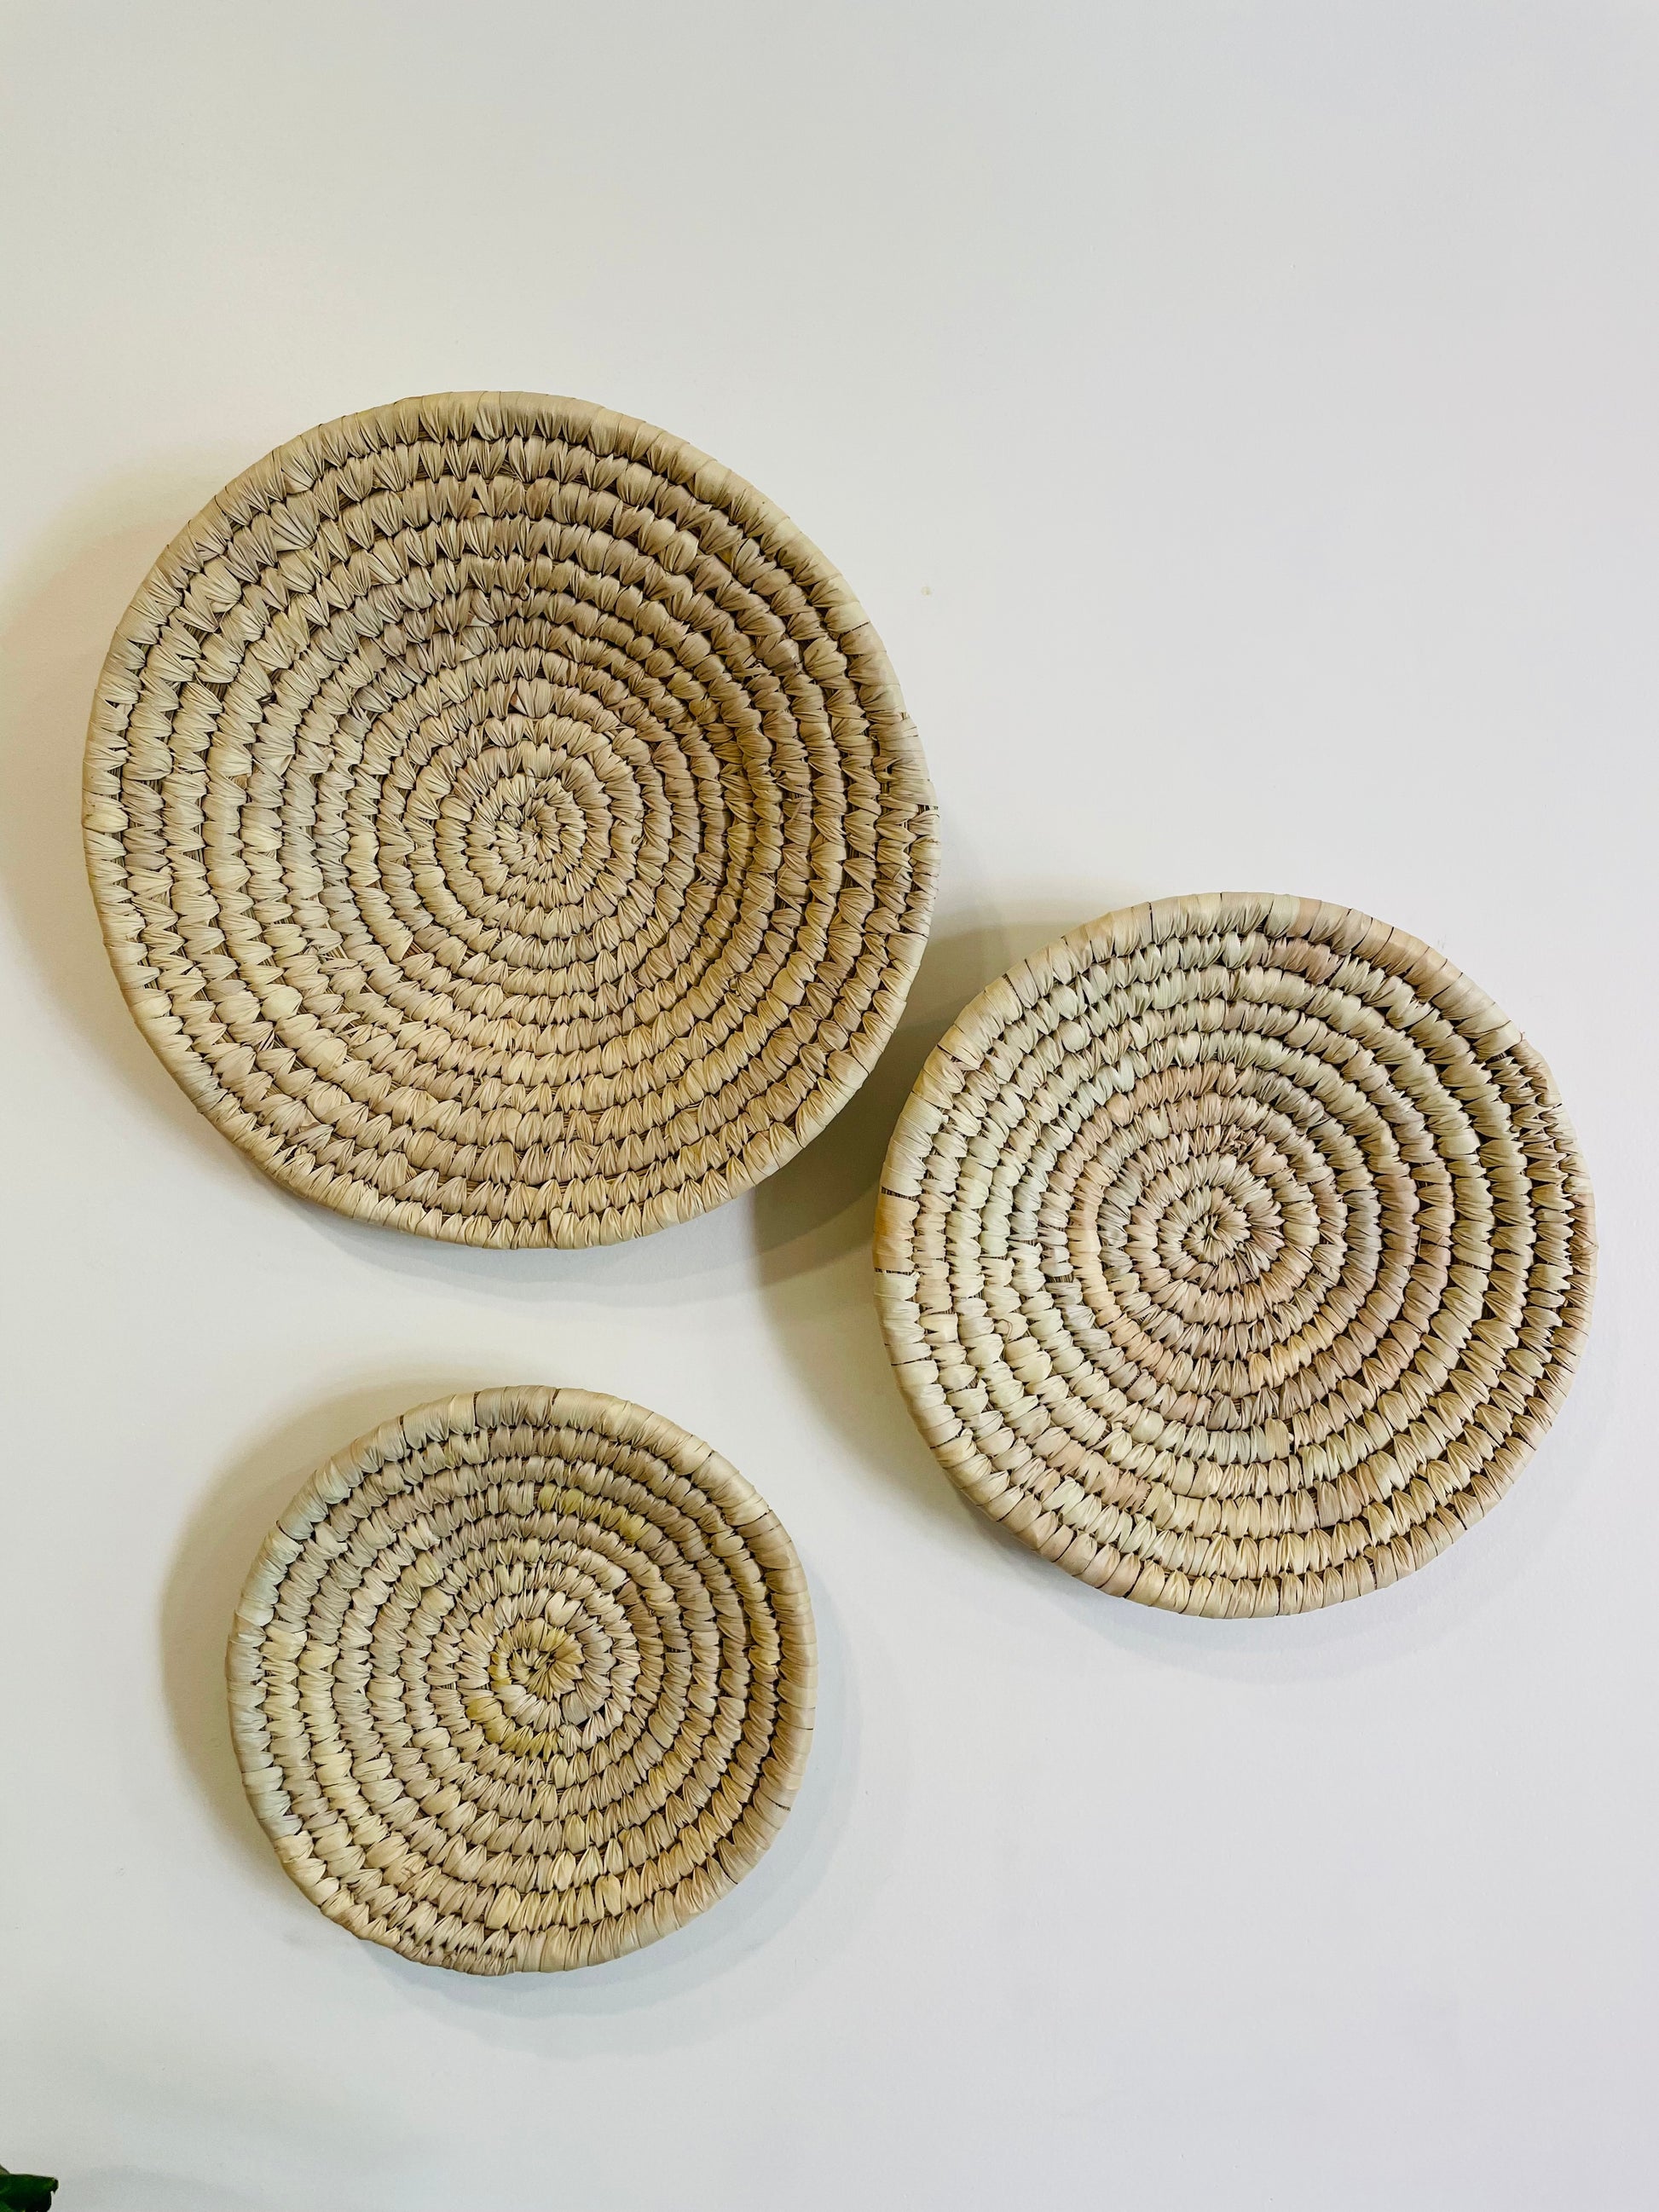  Artisanal Palm Leaf Design, Boho Home Accessory, Circular Wall Baskets, Easy Hanging Hook, Eco-friendly Plate, Fruit or Bread Baskets, Handcrafted Wall Décor, Indian Artisan Craft, Natural Palm Leaf Plates, Palm Leaf Woven Plates, Spiral-shaped Design, Sustainable Home Décor, Three Sizes Available, Wall Hanging Plate, Tesu